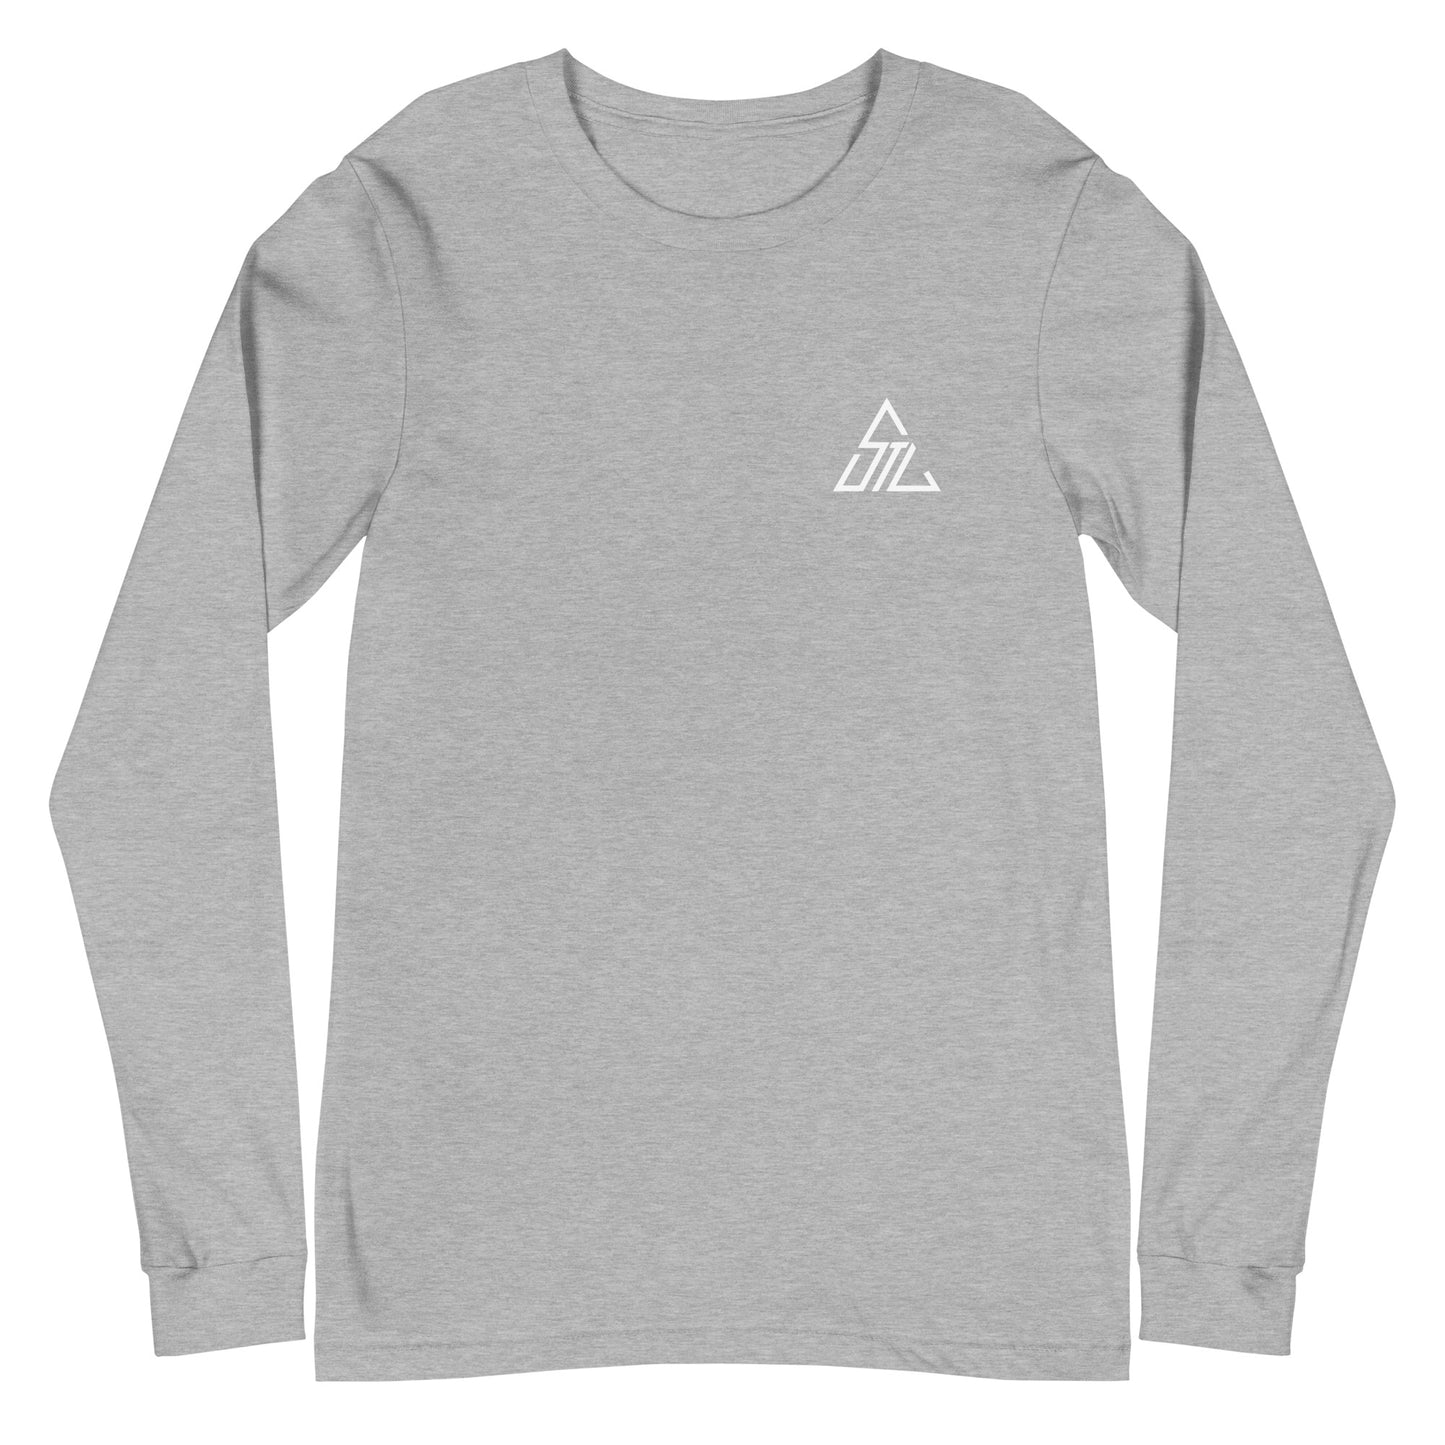 Two More Skip The Last "Bluebird" heather grey unisex Long sleeve t-shirt. Front view